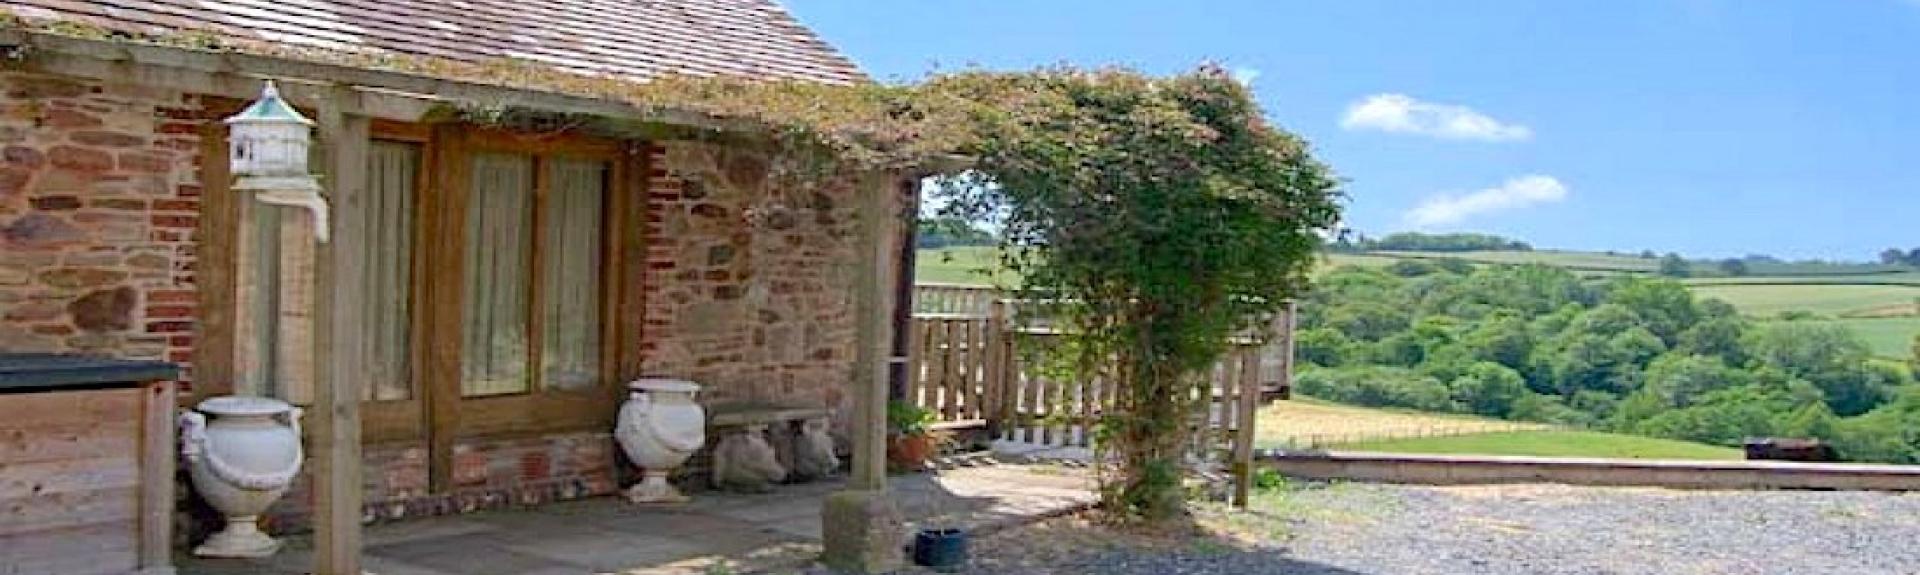 Cloistered extrior of a single-storey barn conversion with a creeper-covered pergola.